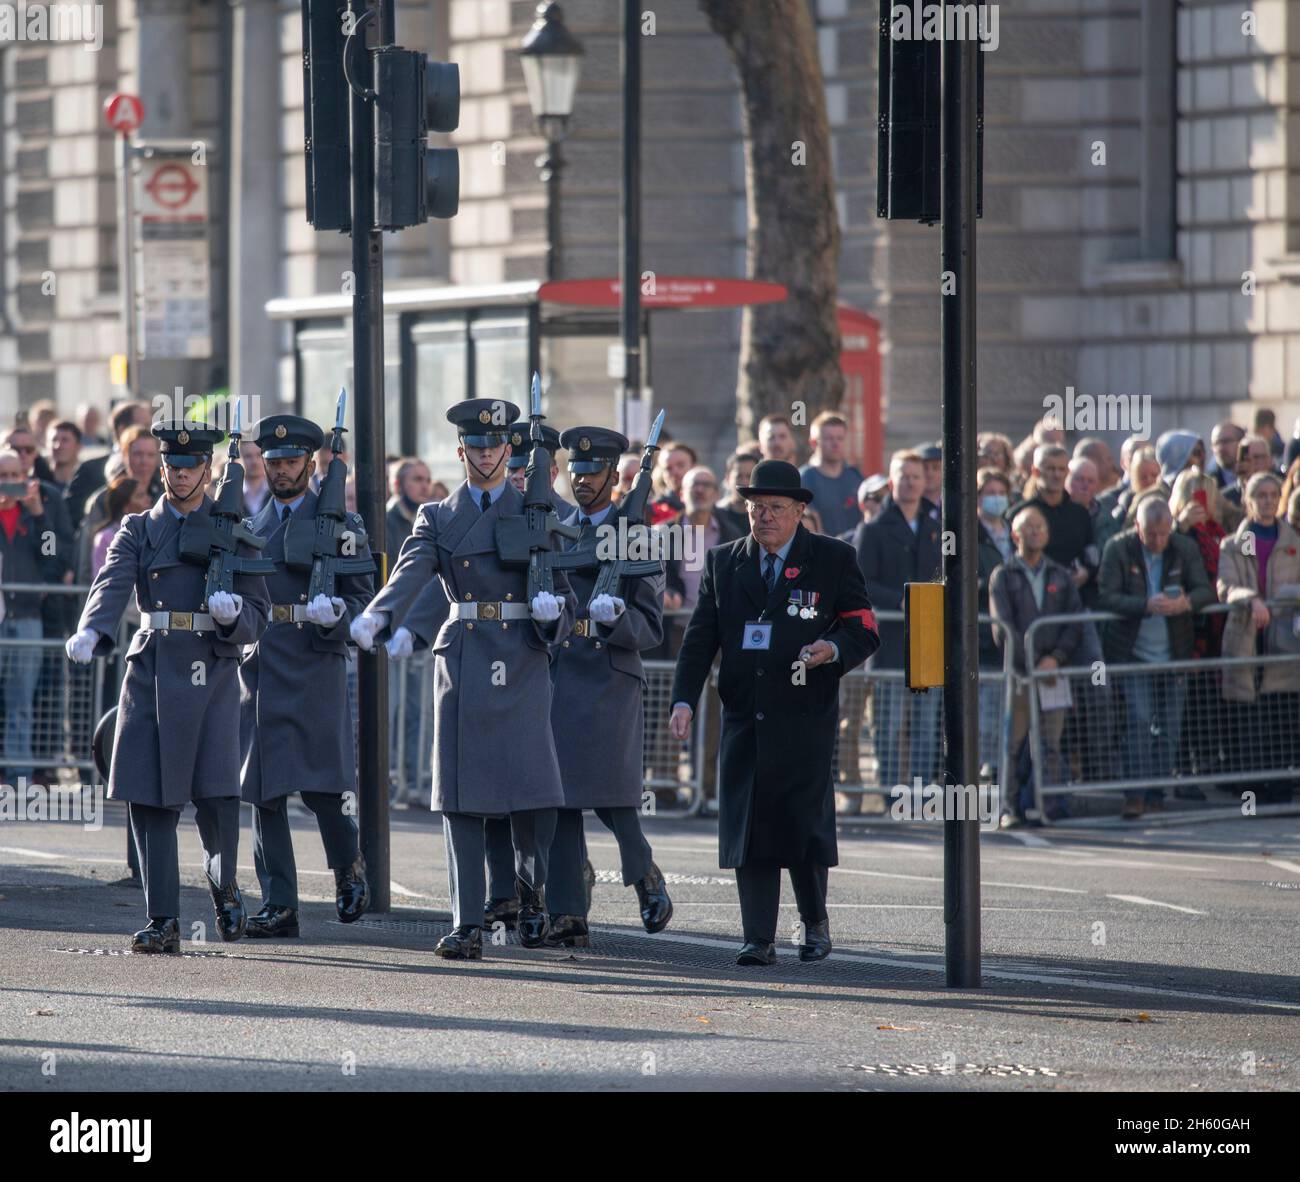 London, UK. The Western Front Association Annual Service of Remembrance takes place at The Cenotaph in Whitehall on 11 November 2021, attracting large crowds who come to pay their respects on a sunny Autumn day. The Royal Air Force Regiment Vigil Party make their way to The Cenotaph. Credit: Malcolm Park/Alamy Stock Photo